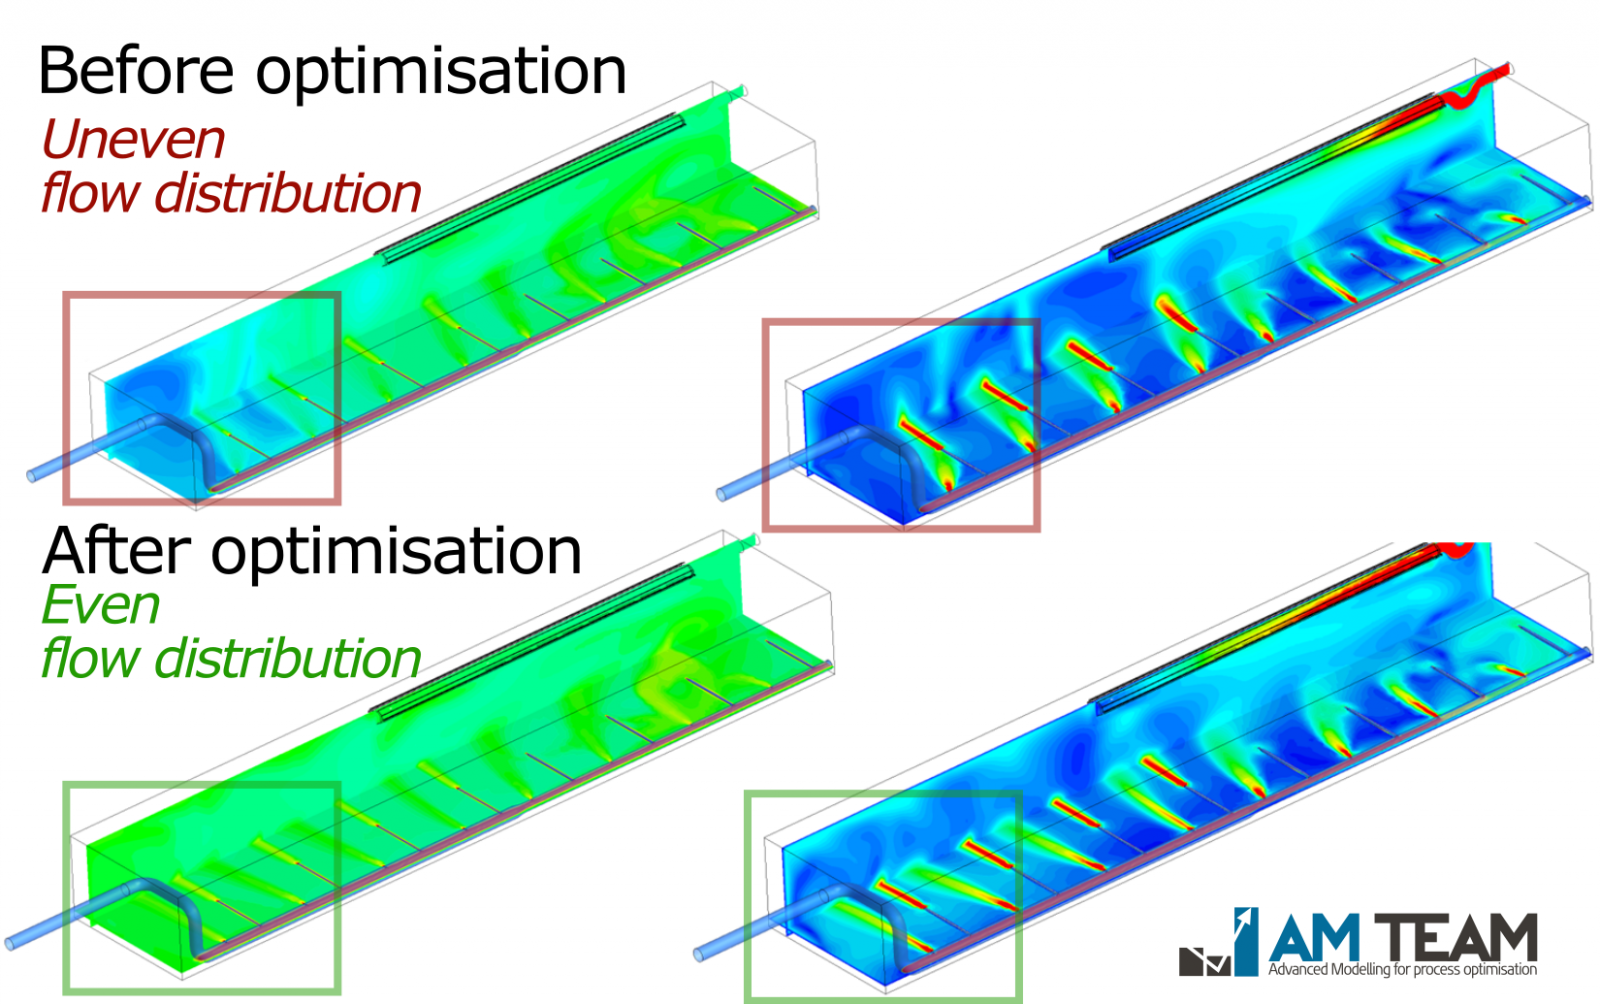 CFD simulation results showing flow distribution in reactor